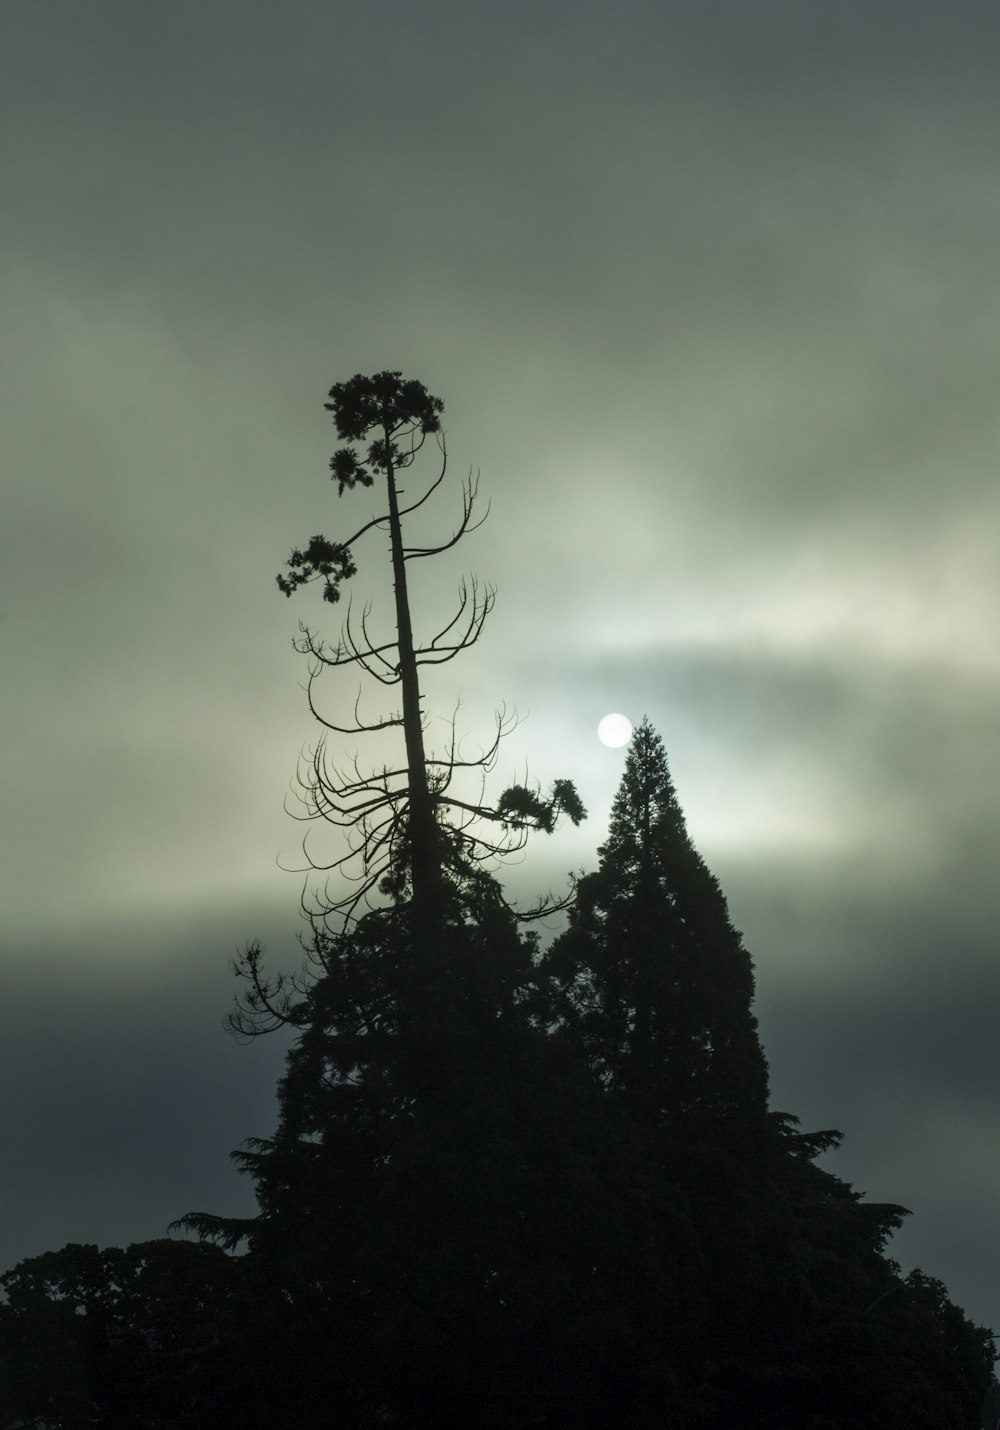 silhouette of trees under cloudy sky